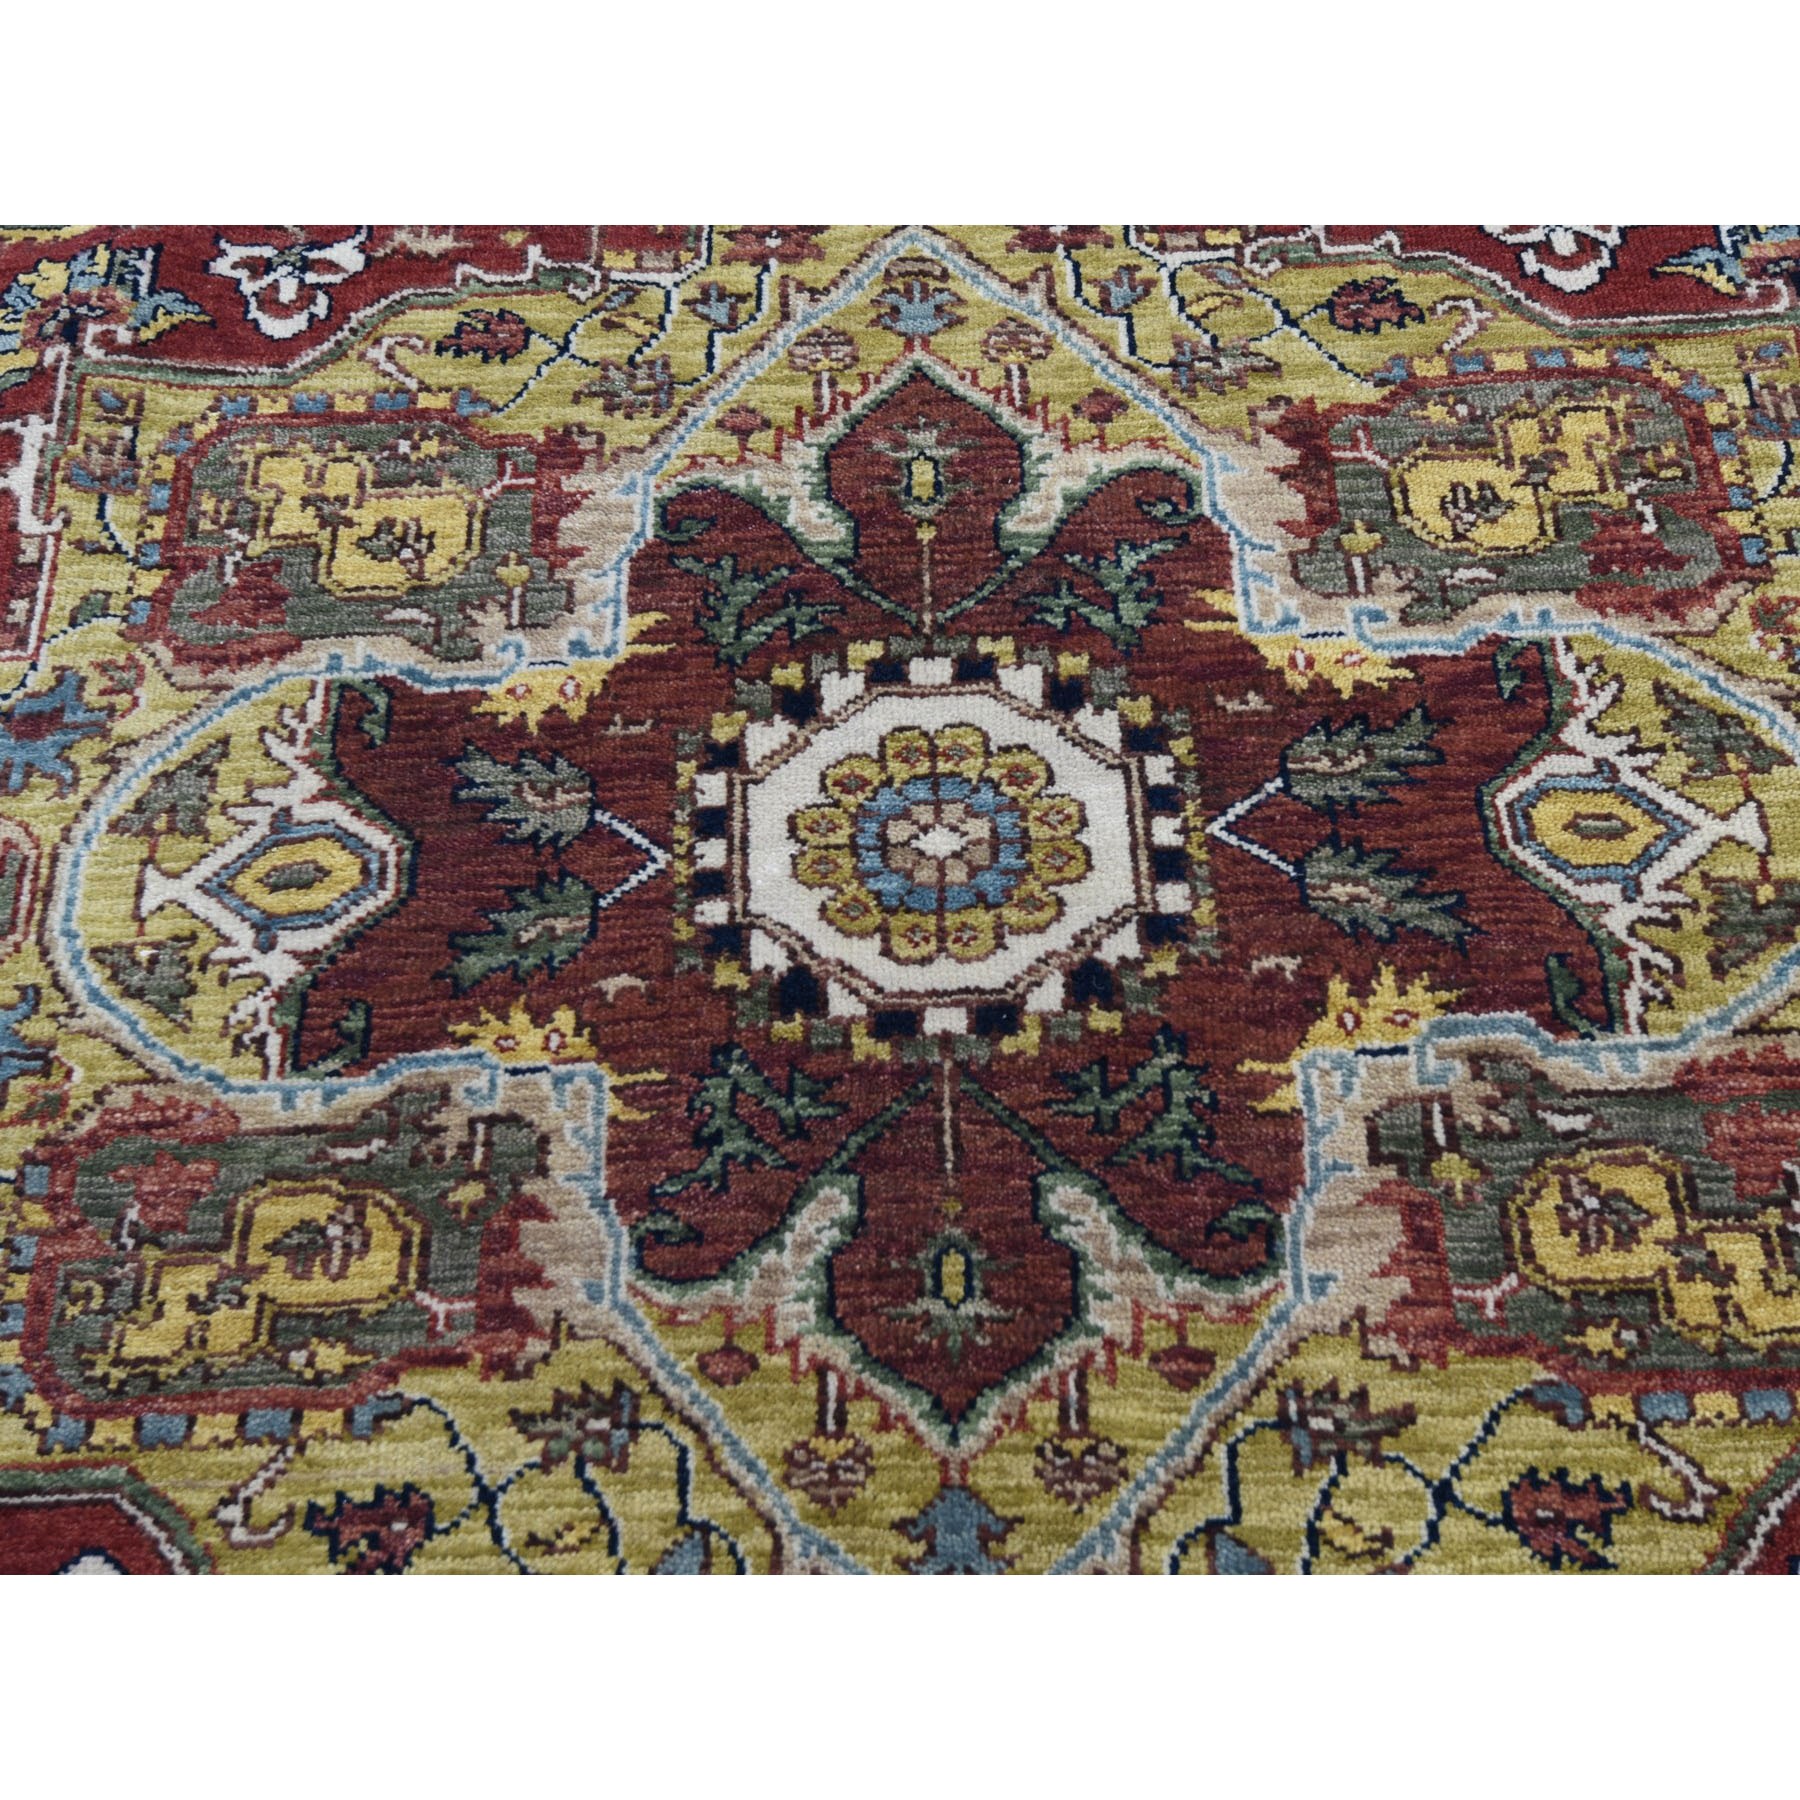 7-9 x7-9  Round Red Heriz Revival Pure Wool Hand Knotted Oriental Rug 